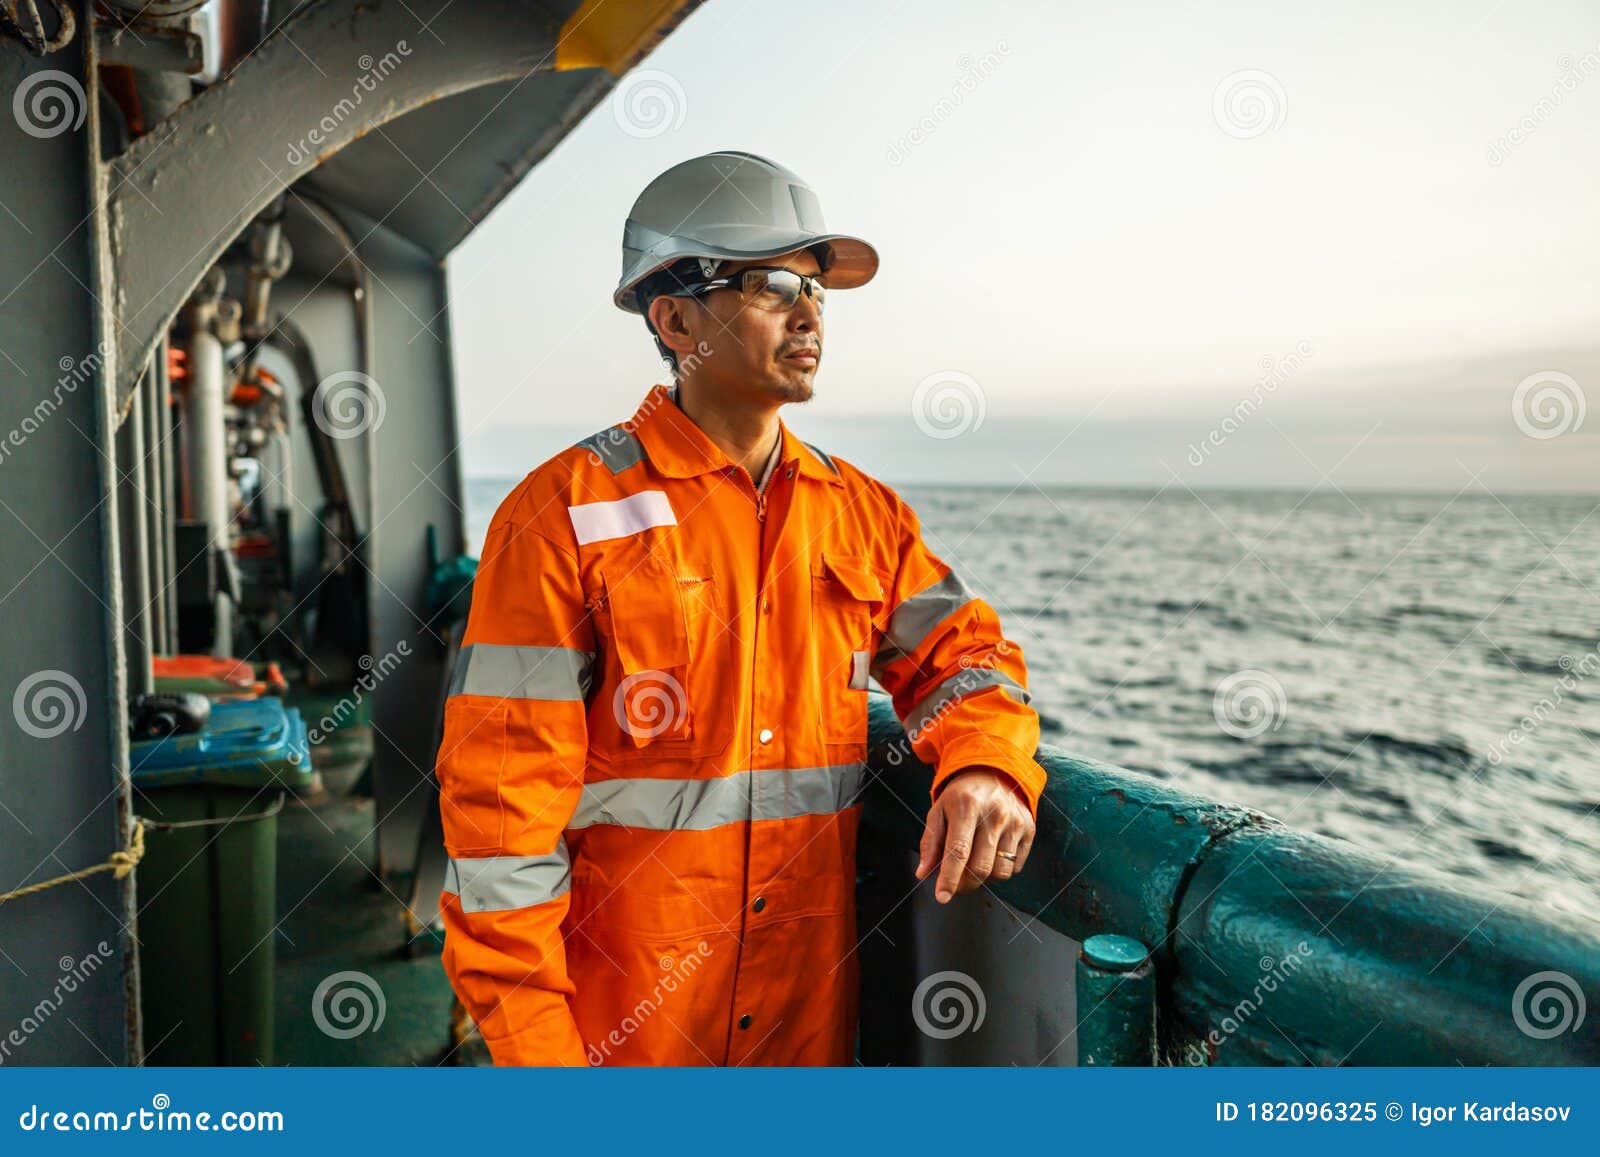 filipino deck officer on deck of vessel or ship